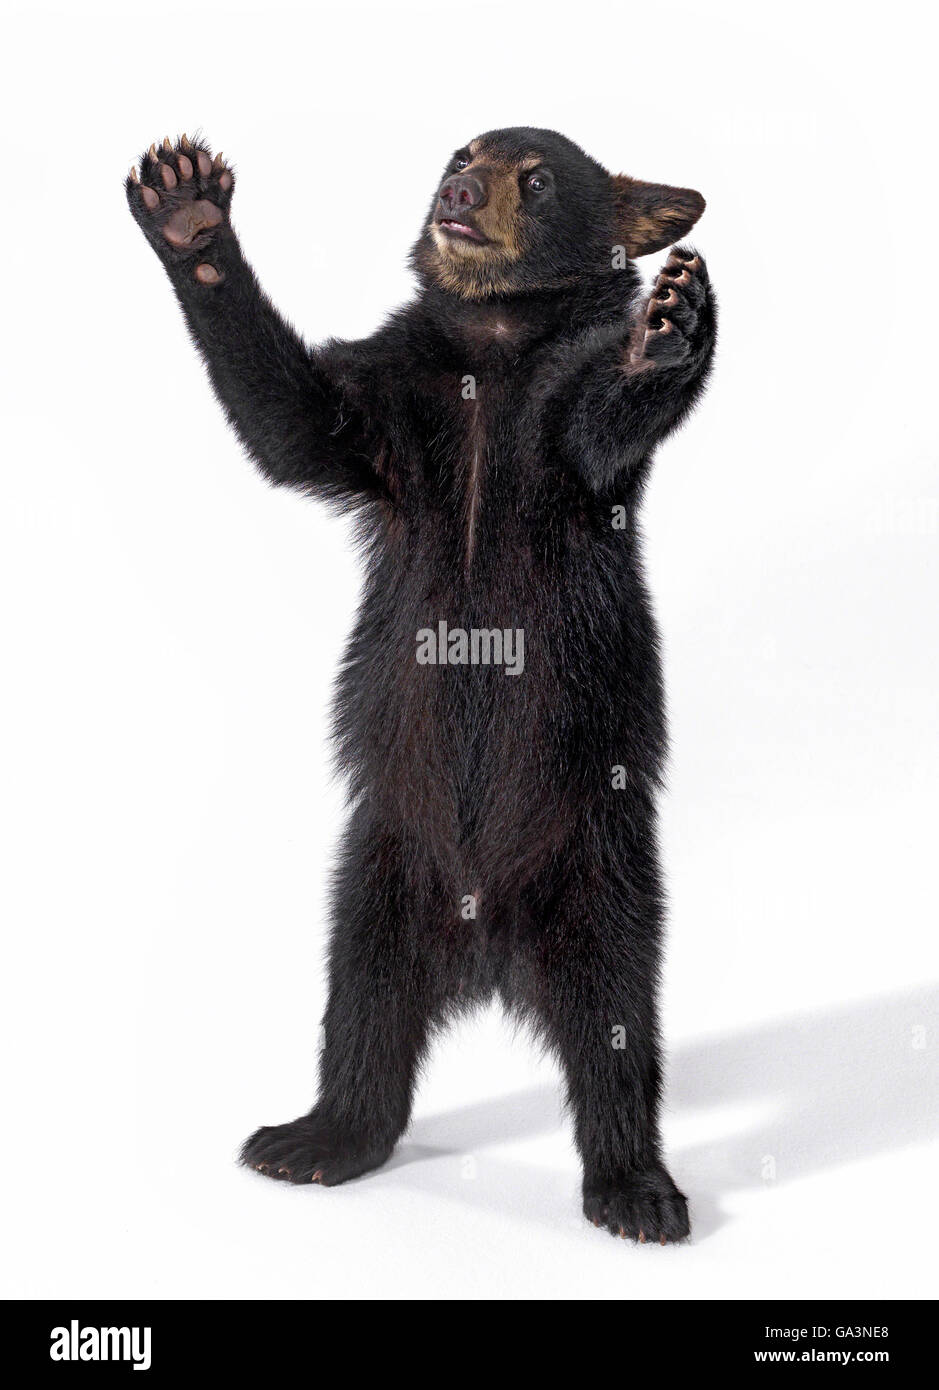 Black bear cub standing on hind legs, arms open wide with a whimsical expression. Stock Photo